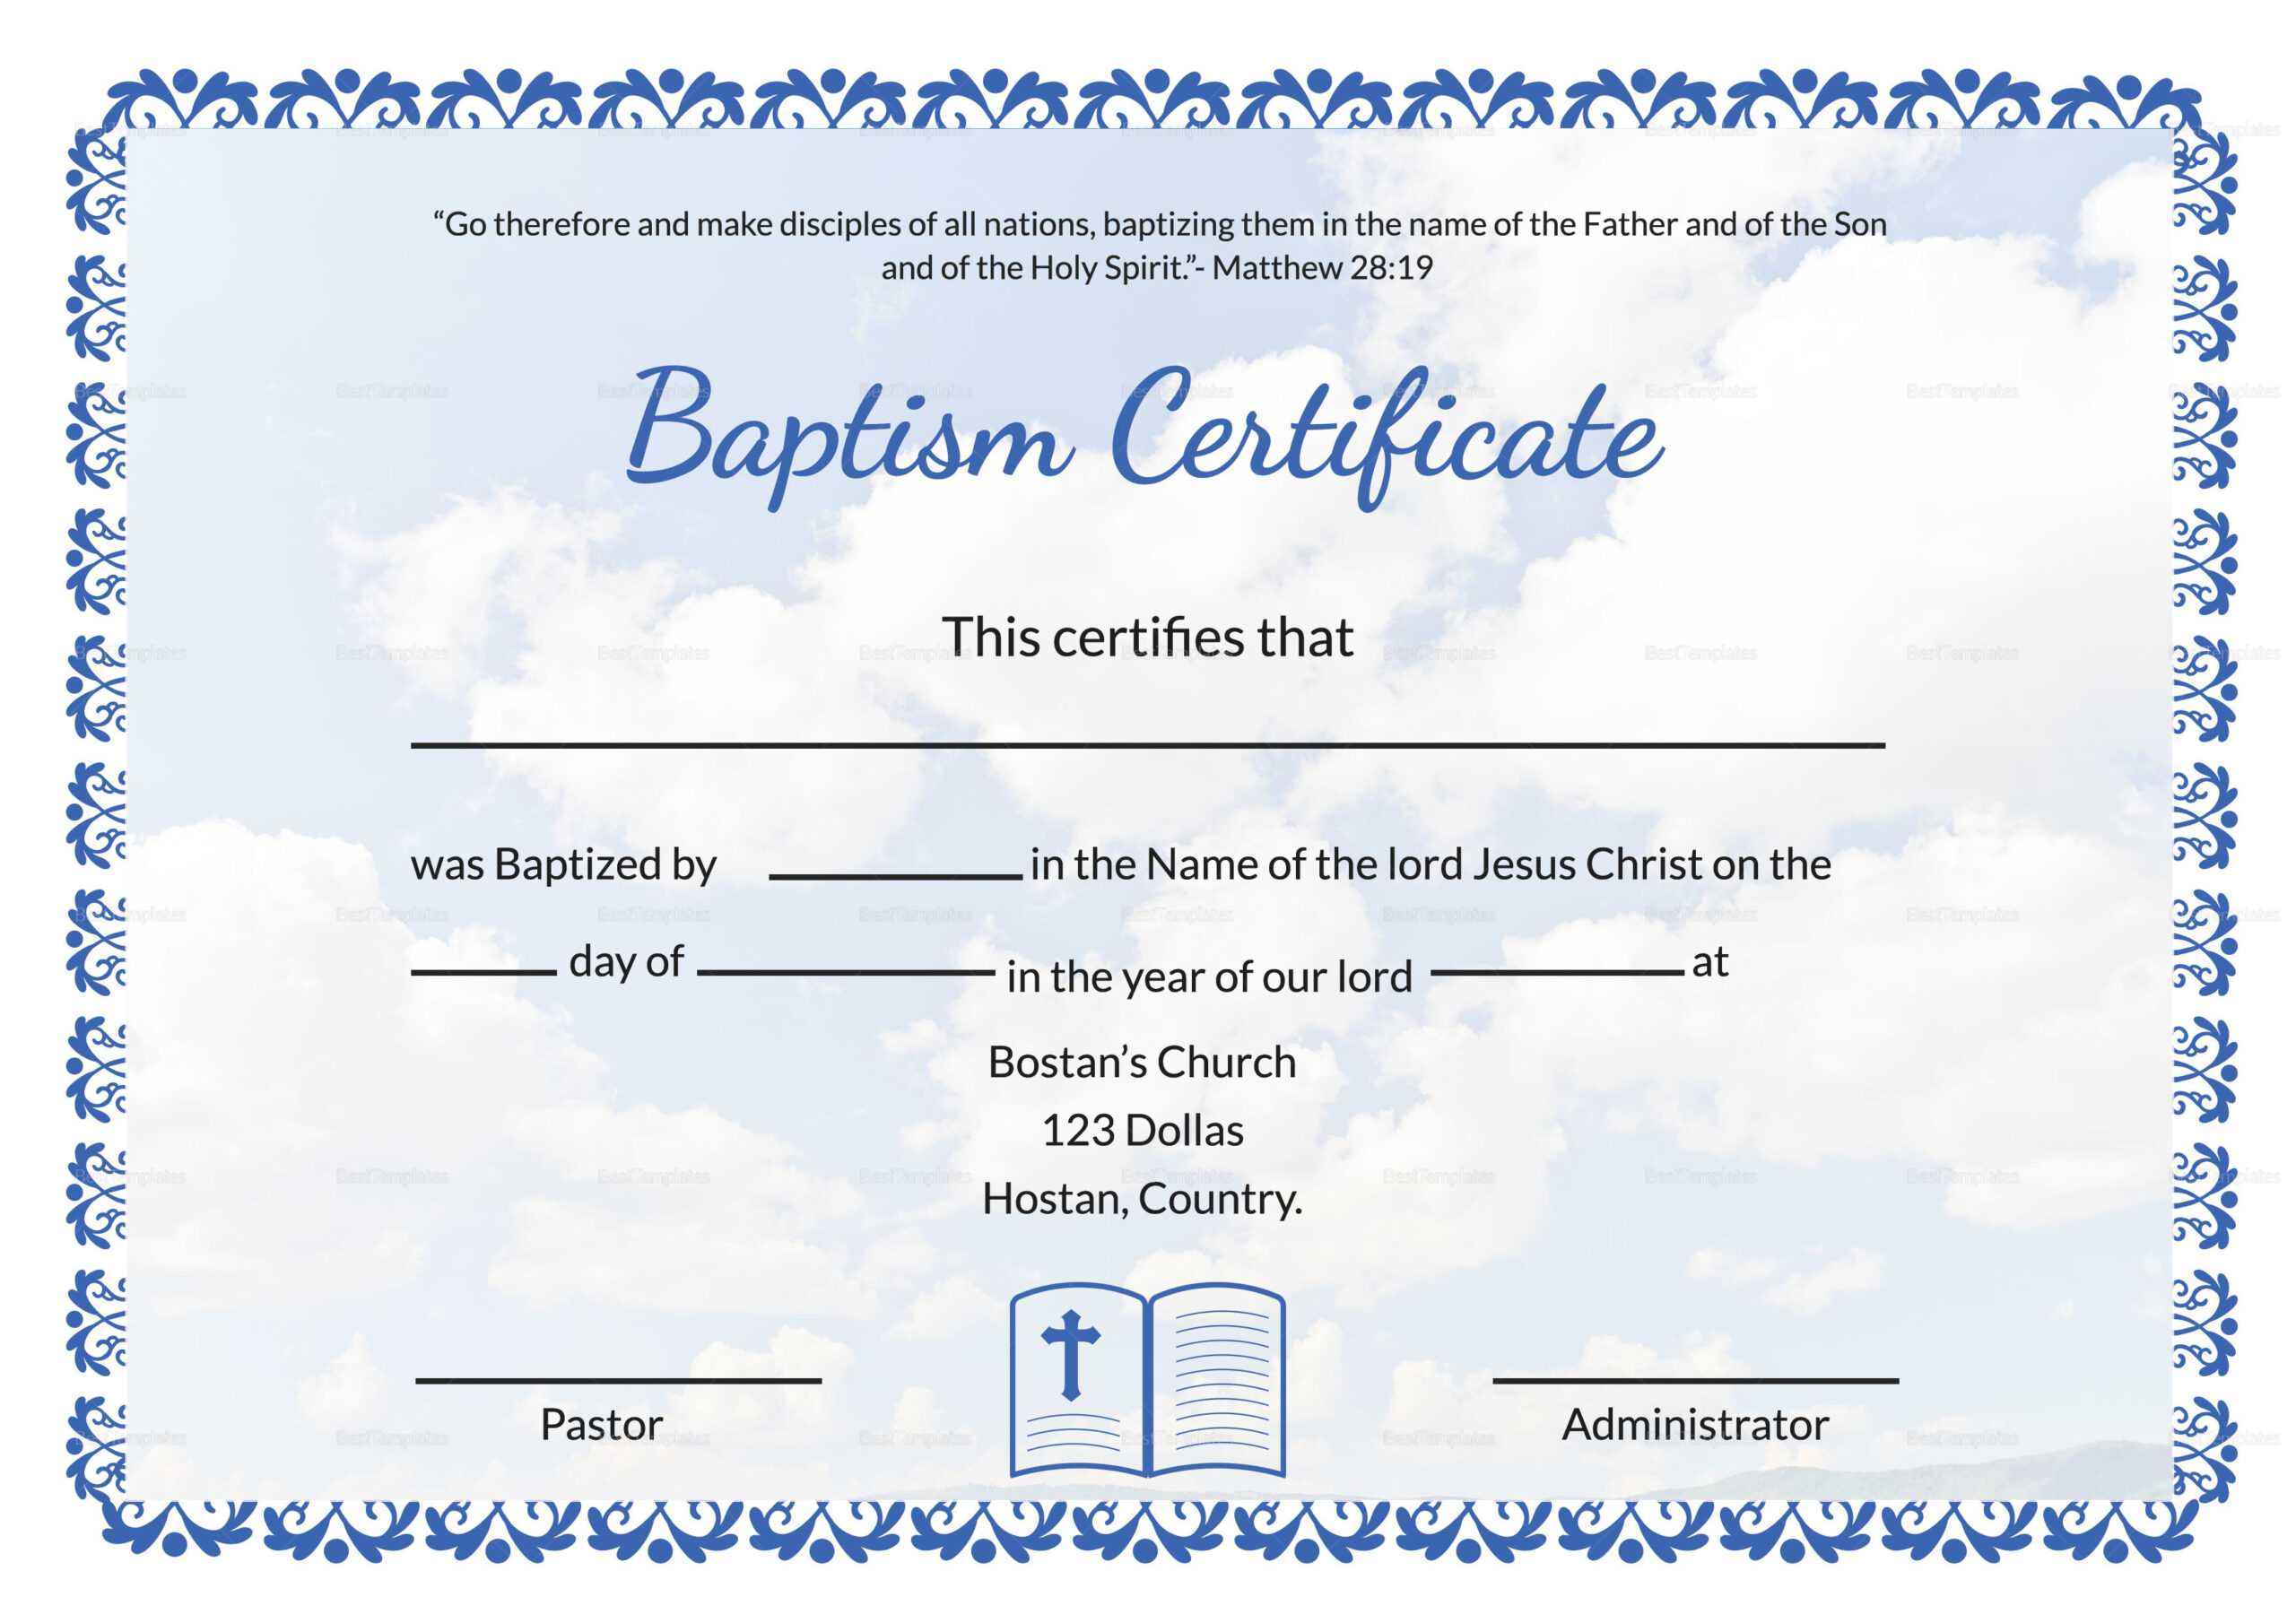 007 Certificate Of Baptism Template Ideas Unique Broadman Throughout Christian Baptism Certificate Template